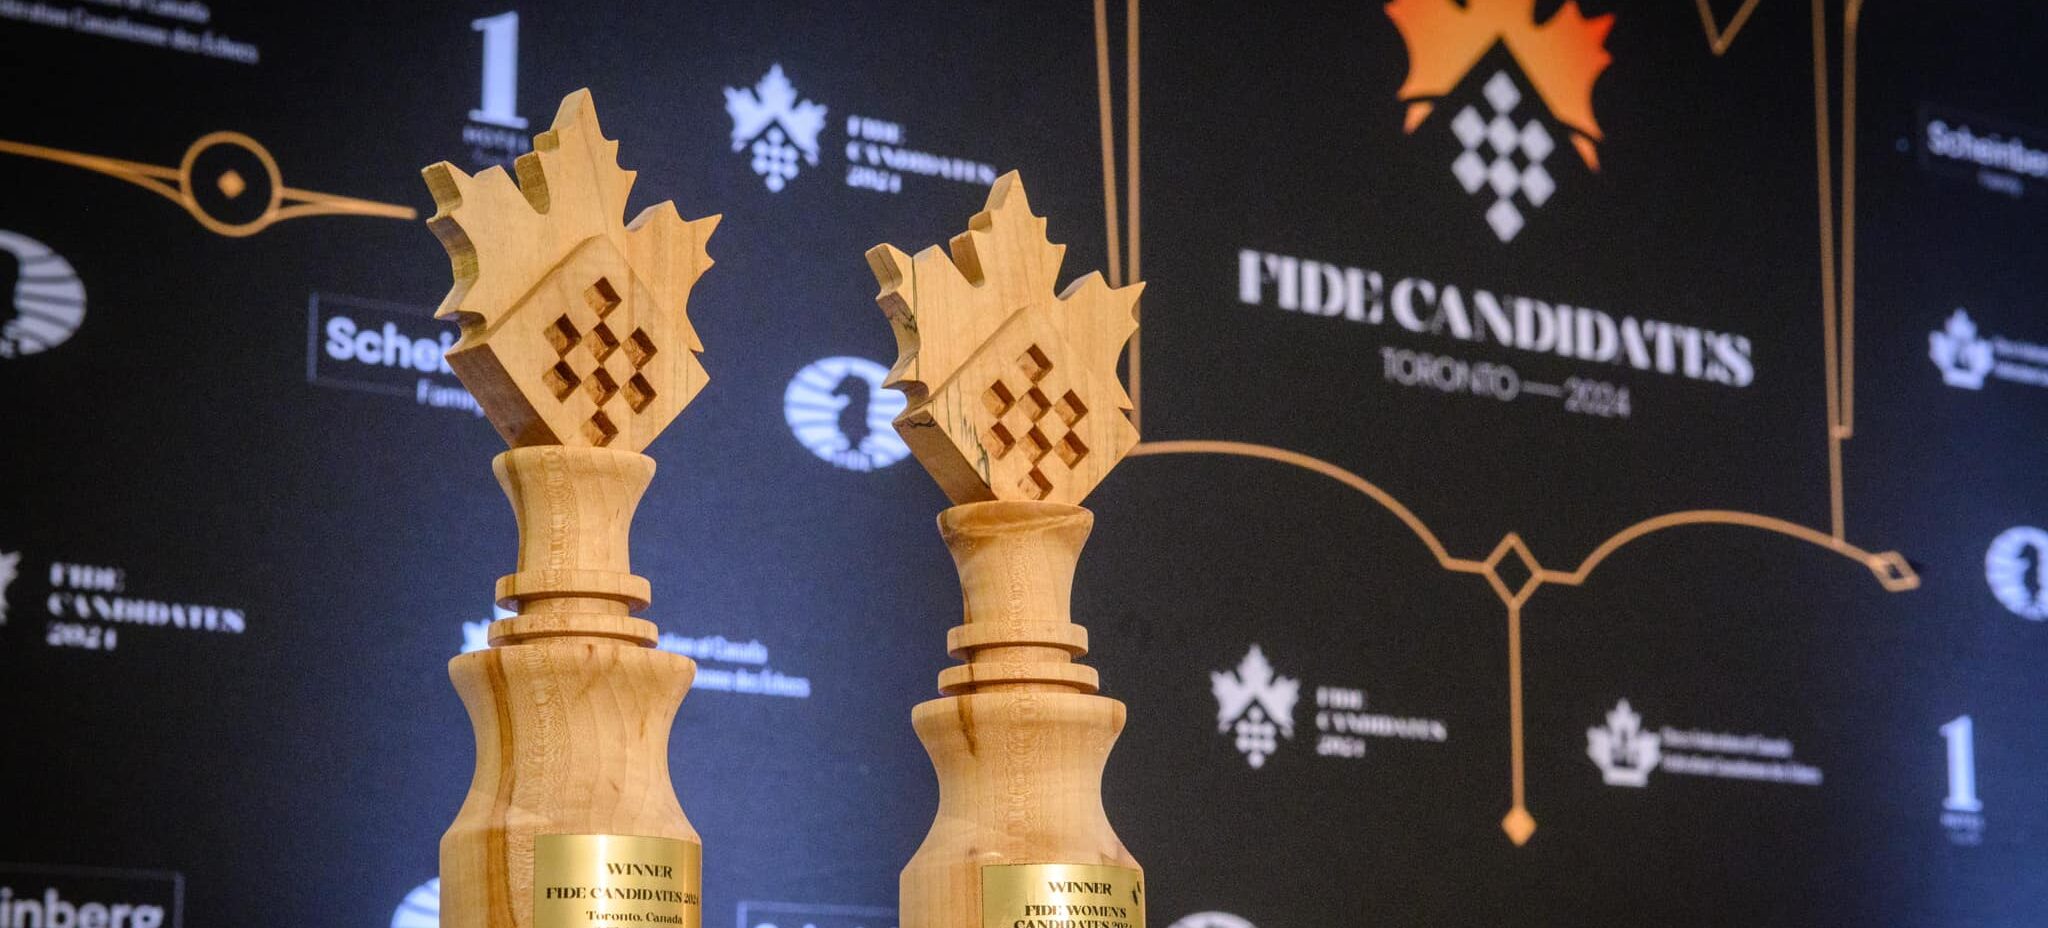 Ukrainian Canadians disappointed by Russian athletes’ inclusion in chess tournament